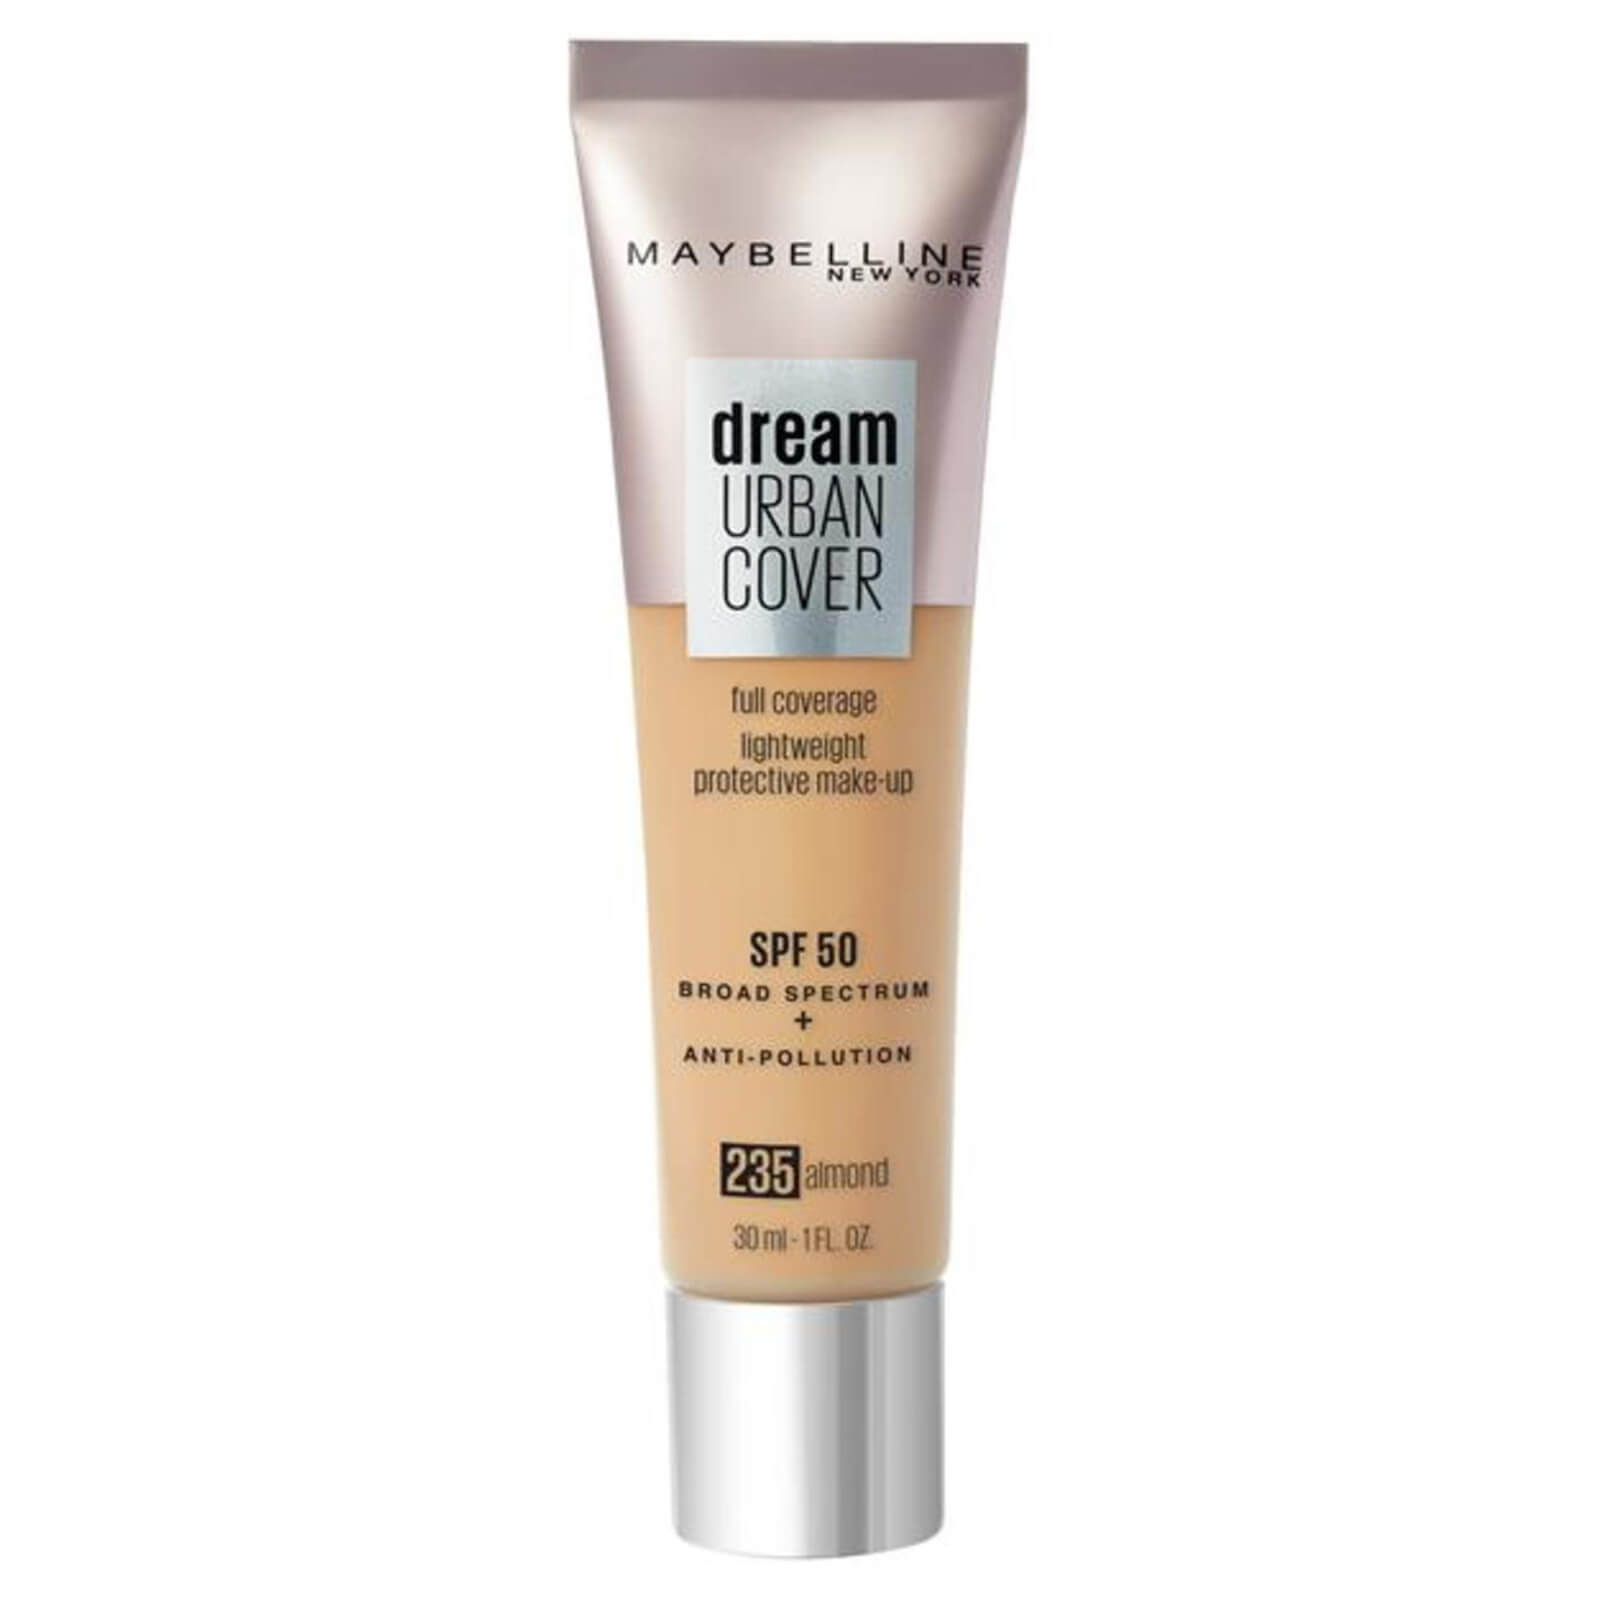 Maybelline Dream Urban Cover SPF50 Foundation 121ml (Various Shades) - 8 235 Almond